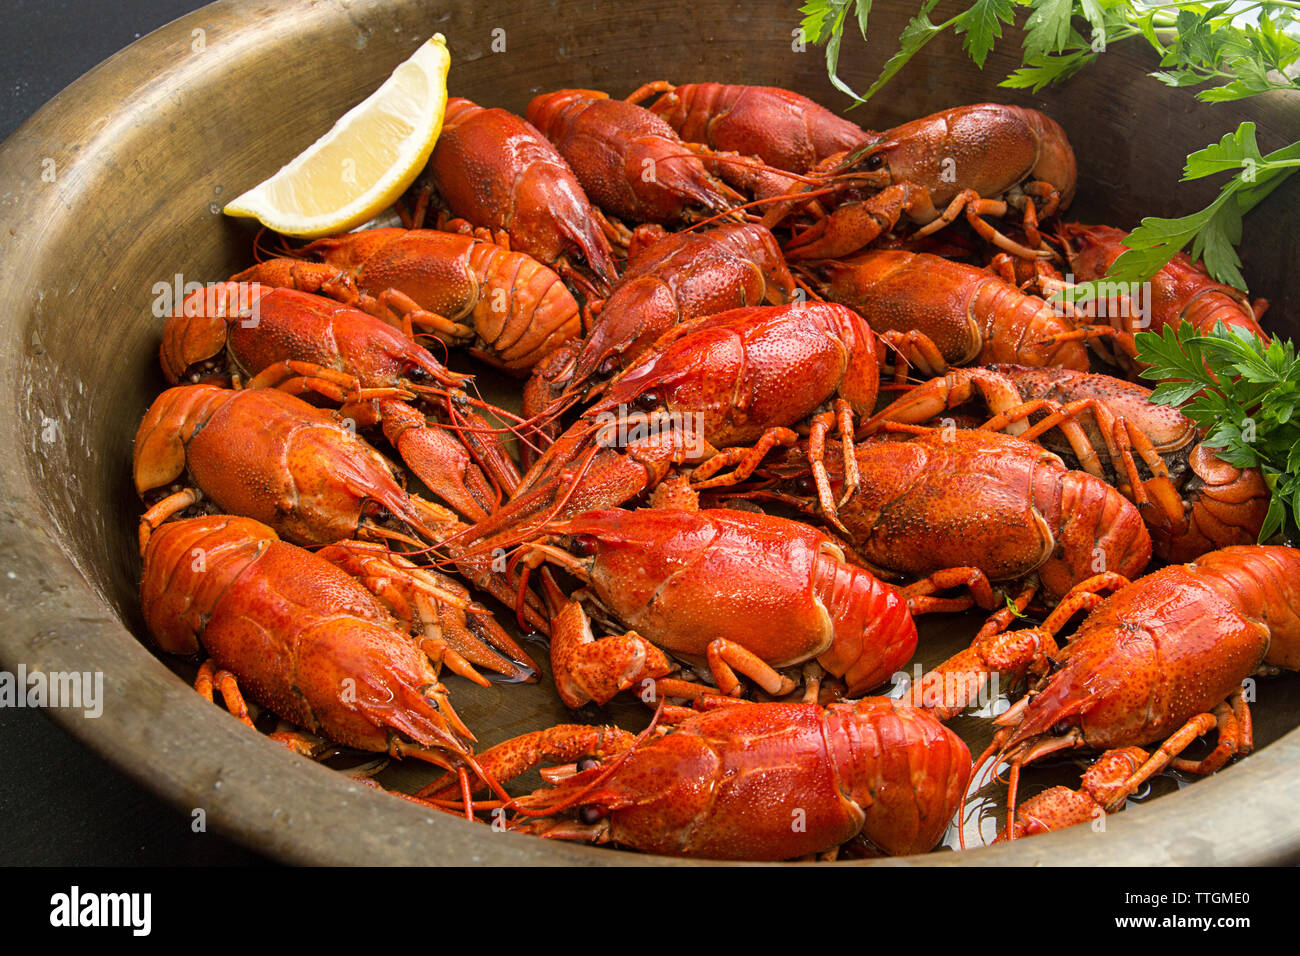 Close-up of boiled crayfish in cooking utensil Stock Photo